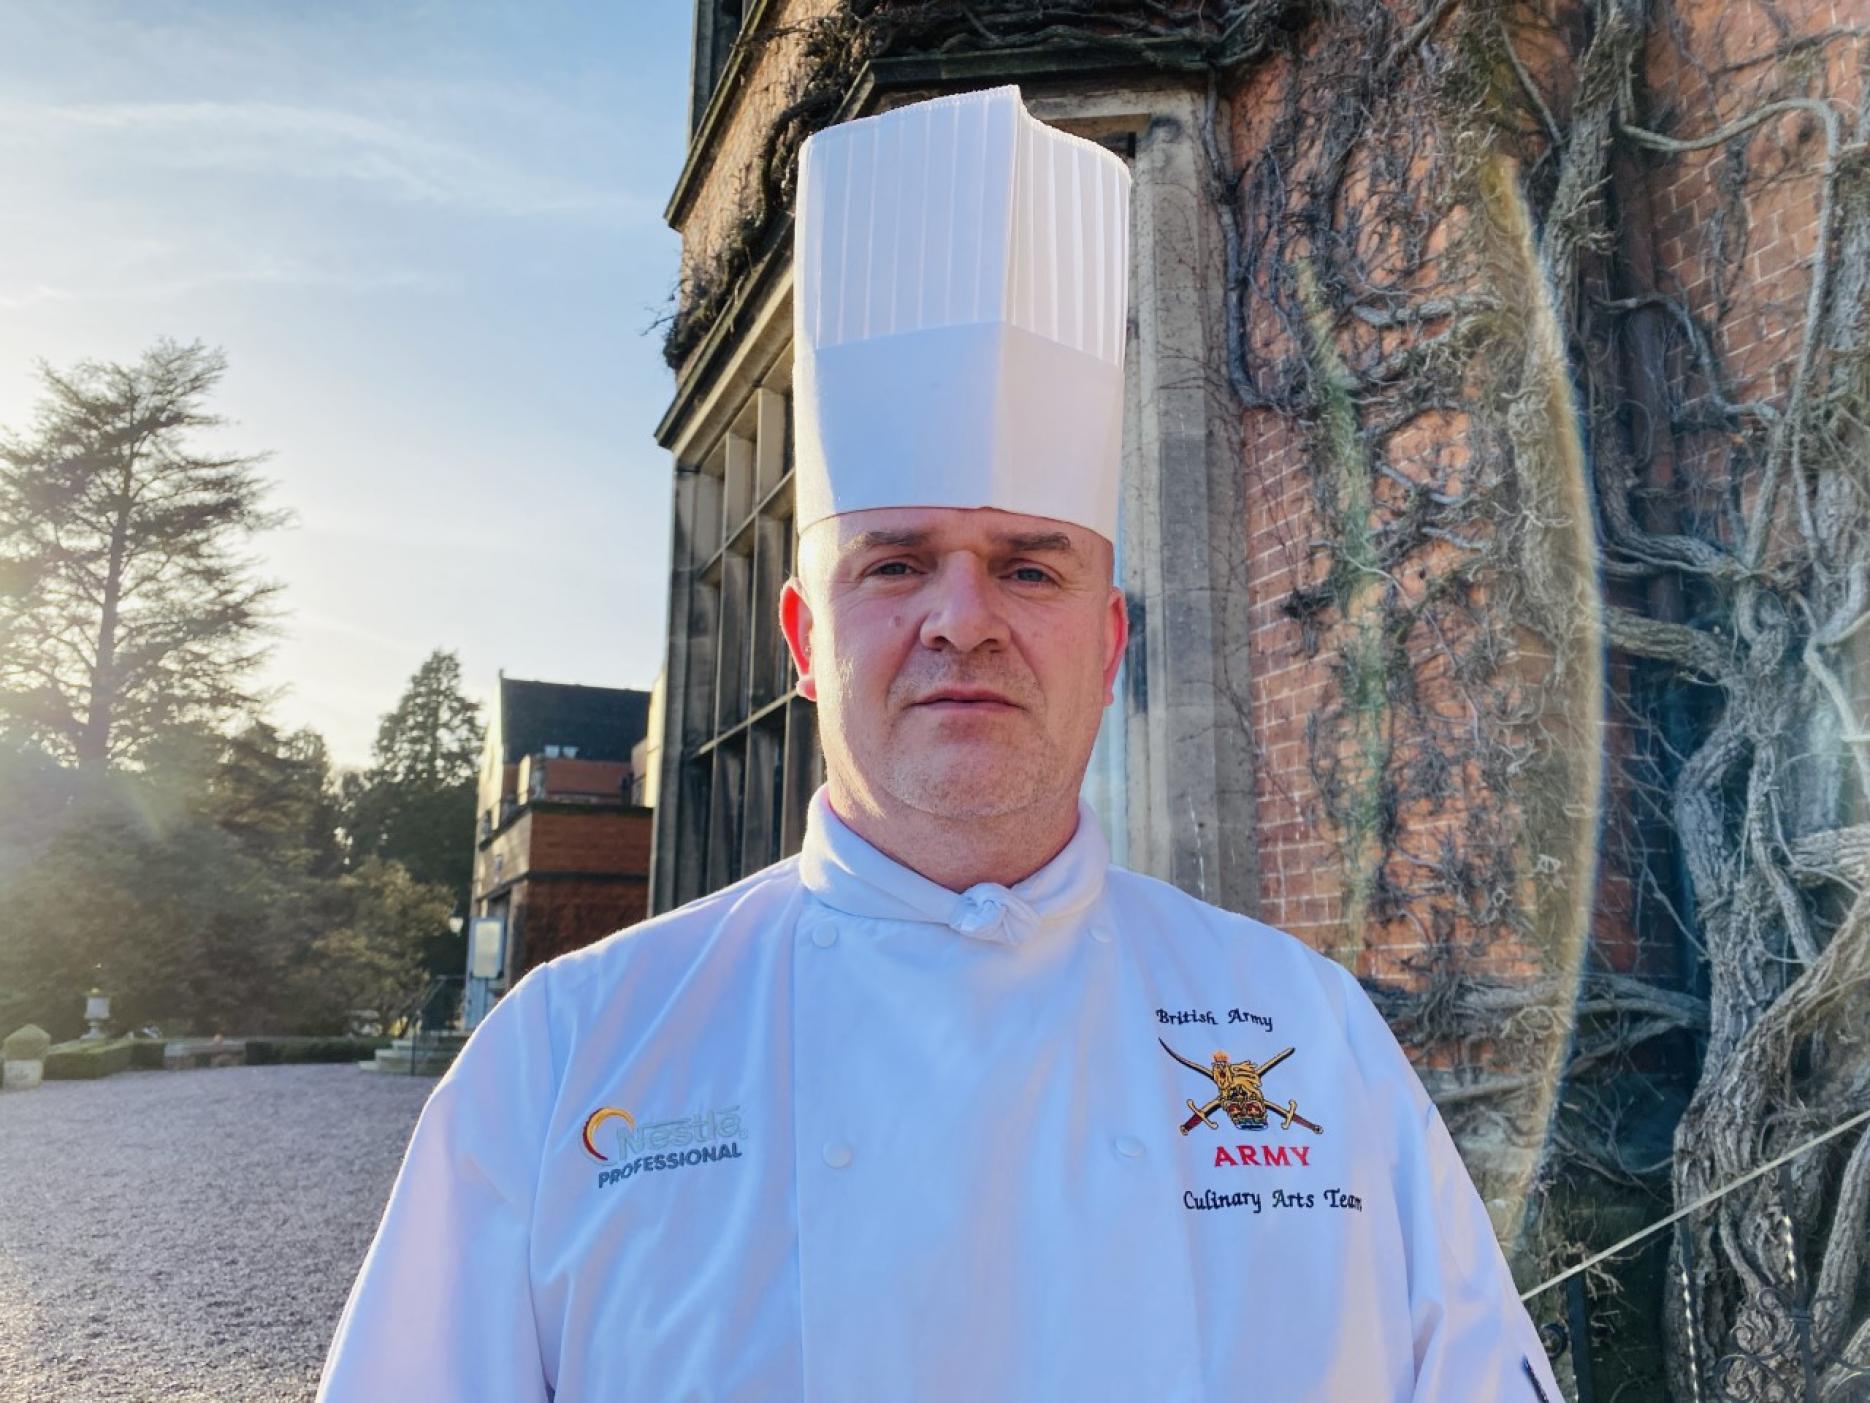 James St Claire-Jones, Hoarcross Hall Hotel & Spa and the British Army Culinary Arts team 